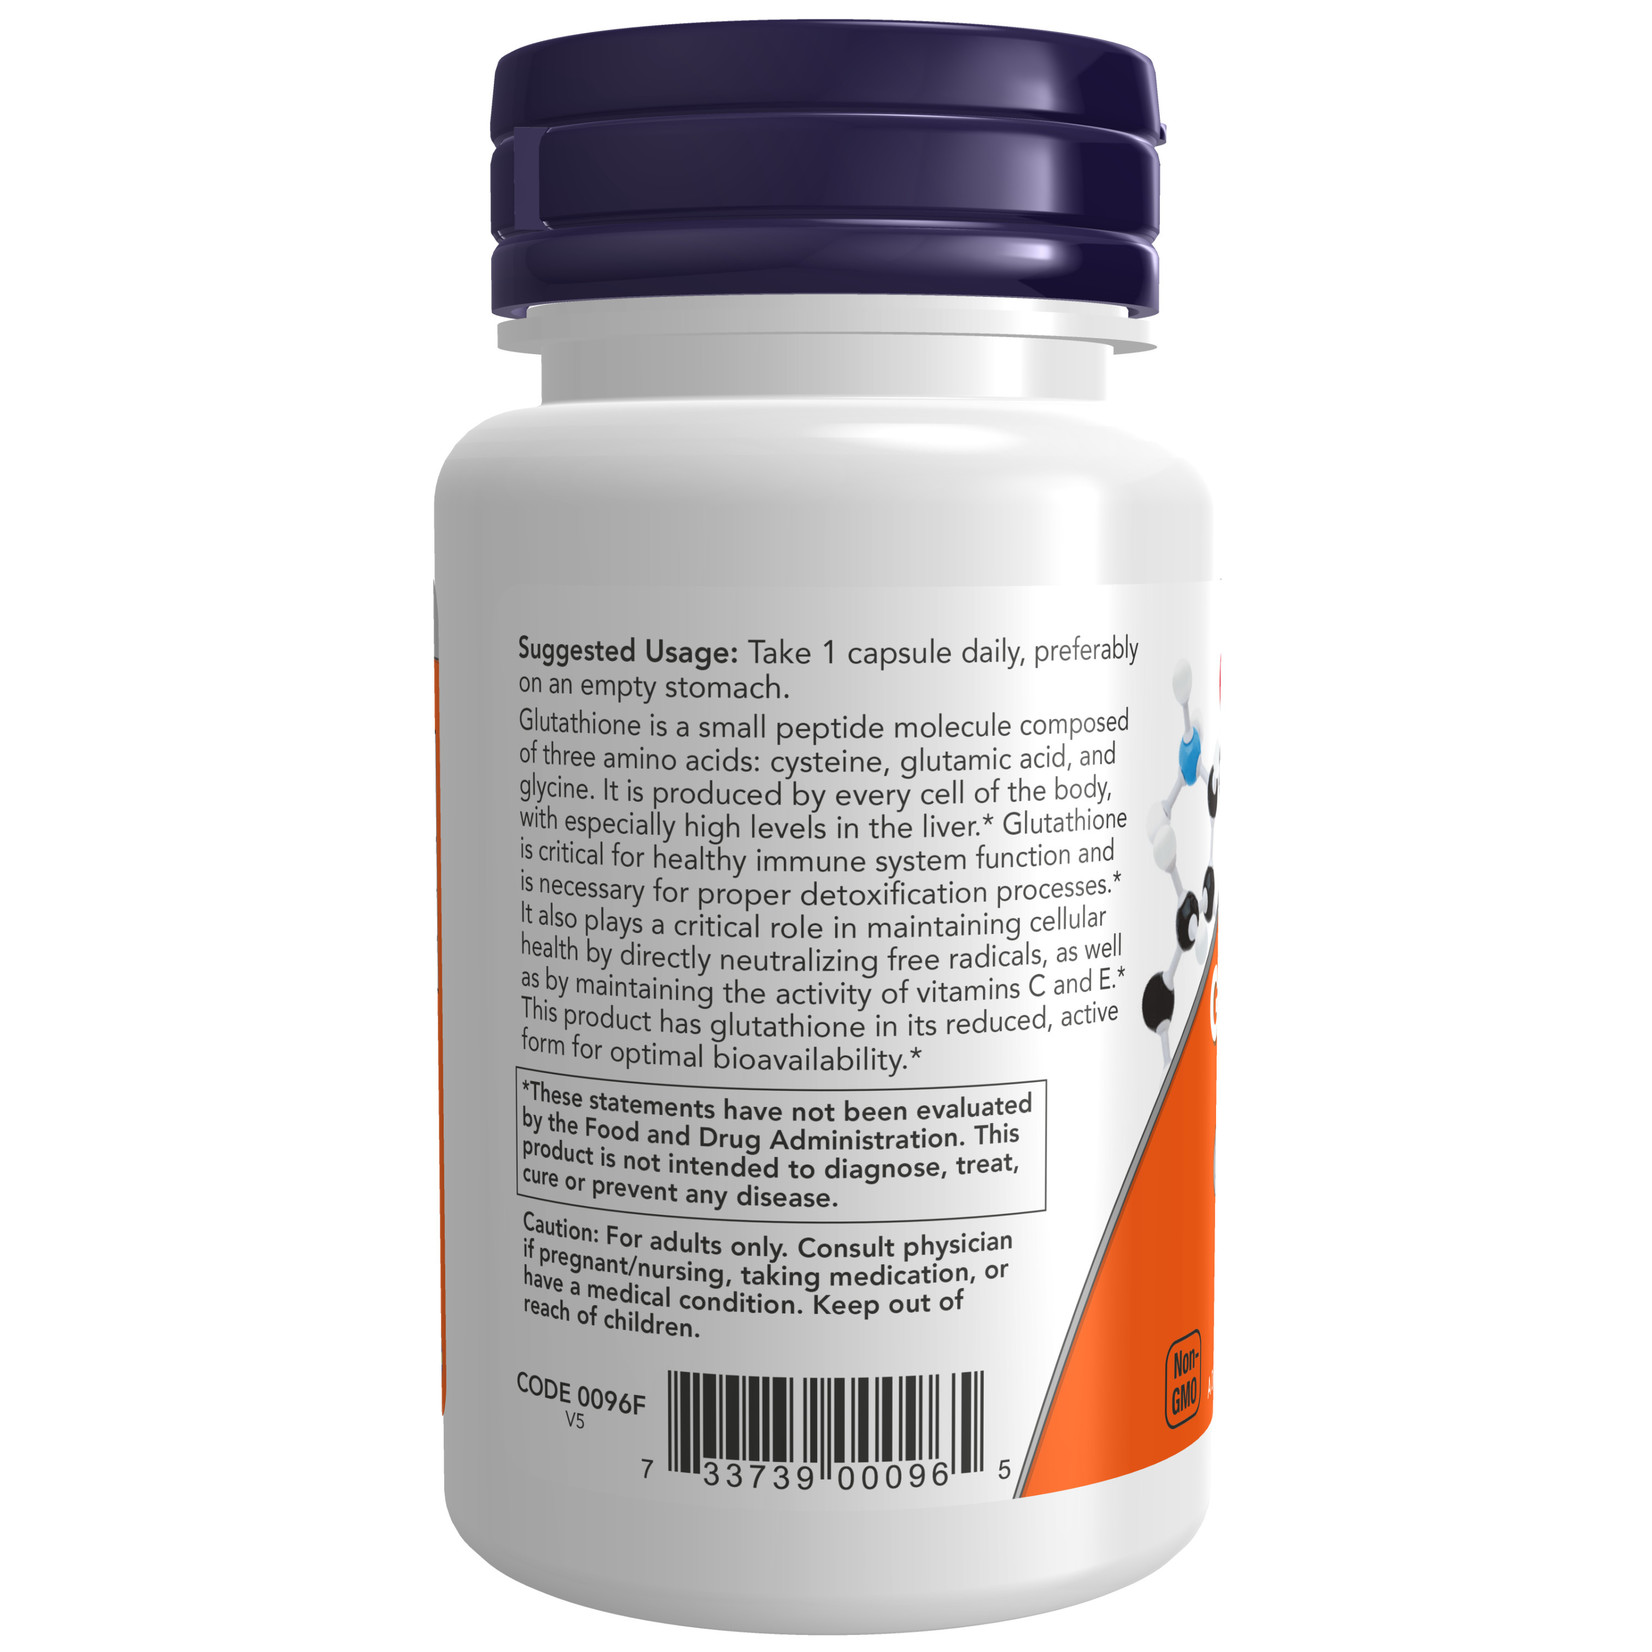 Now Now - Glutathione 250mg - 60 Capsules